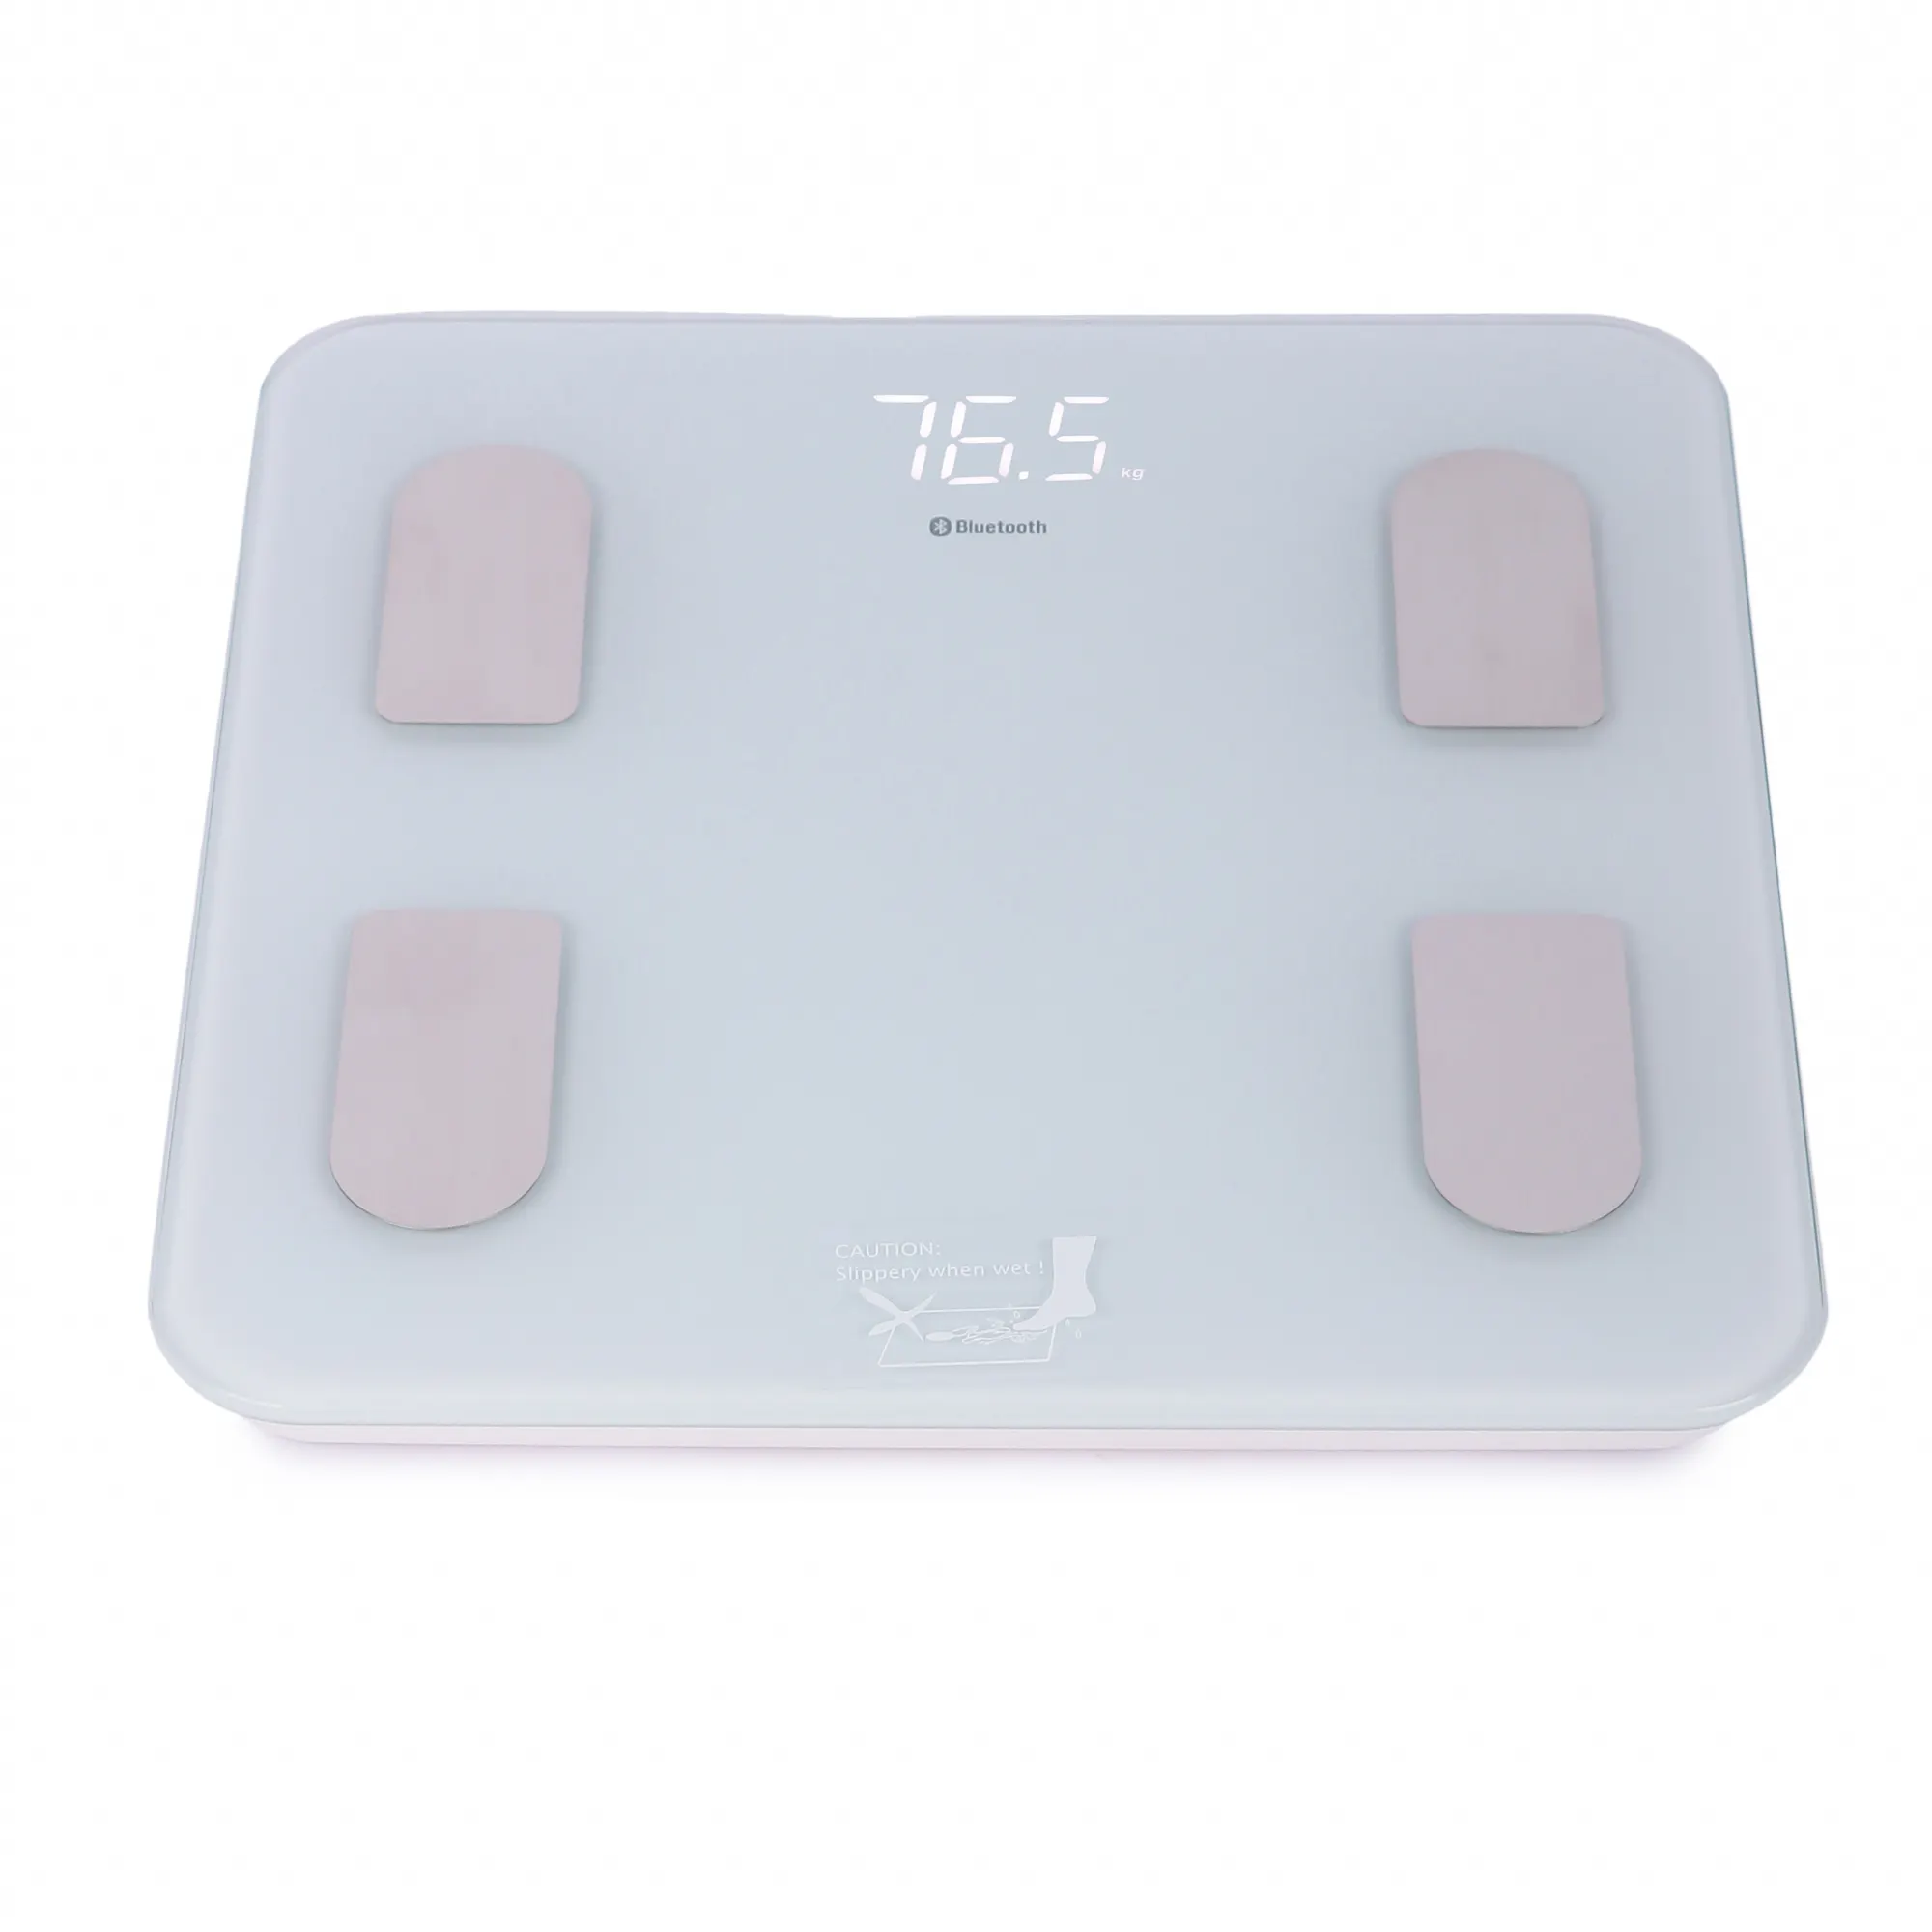 Smart body fat scale Digital bathroom weighing scale with water percentage Muscle mass bluetooth BMI